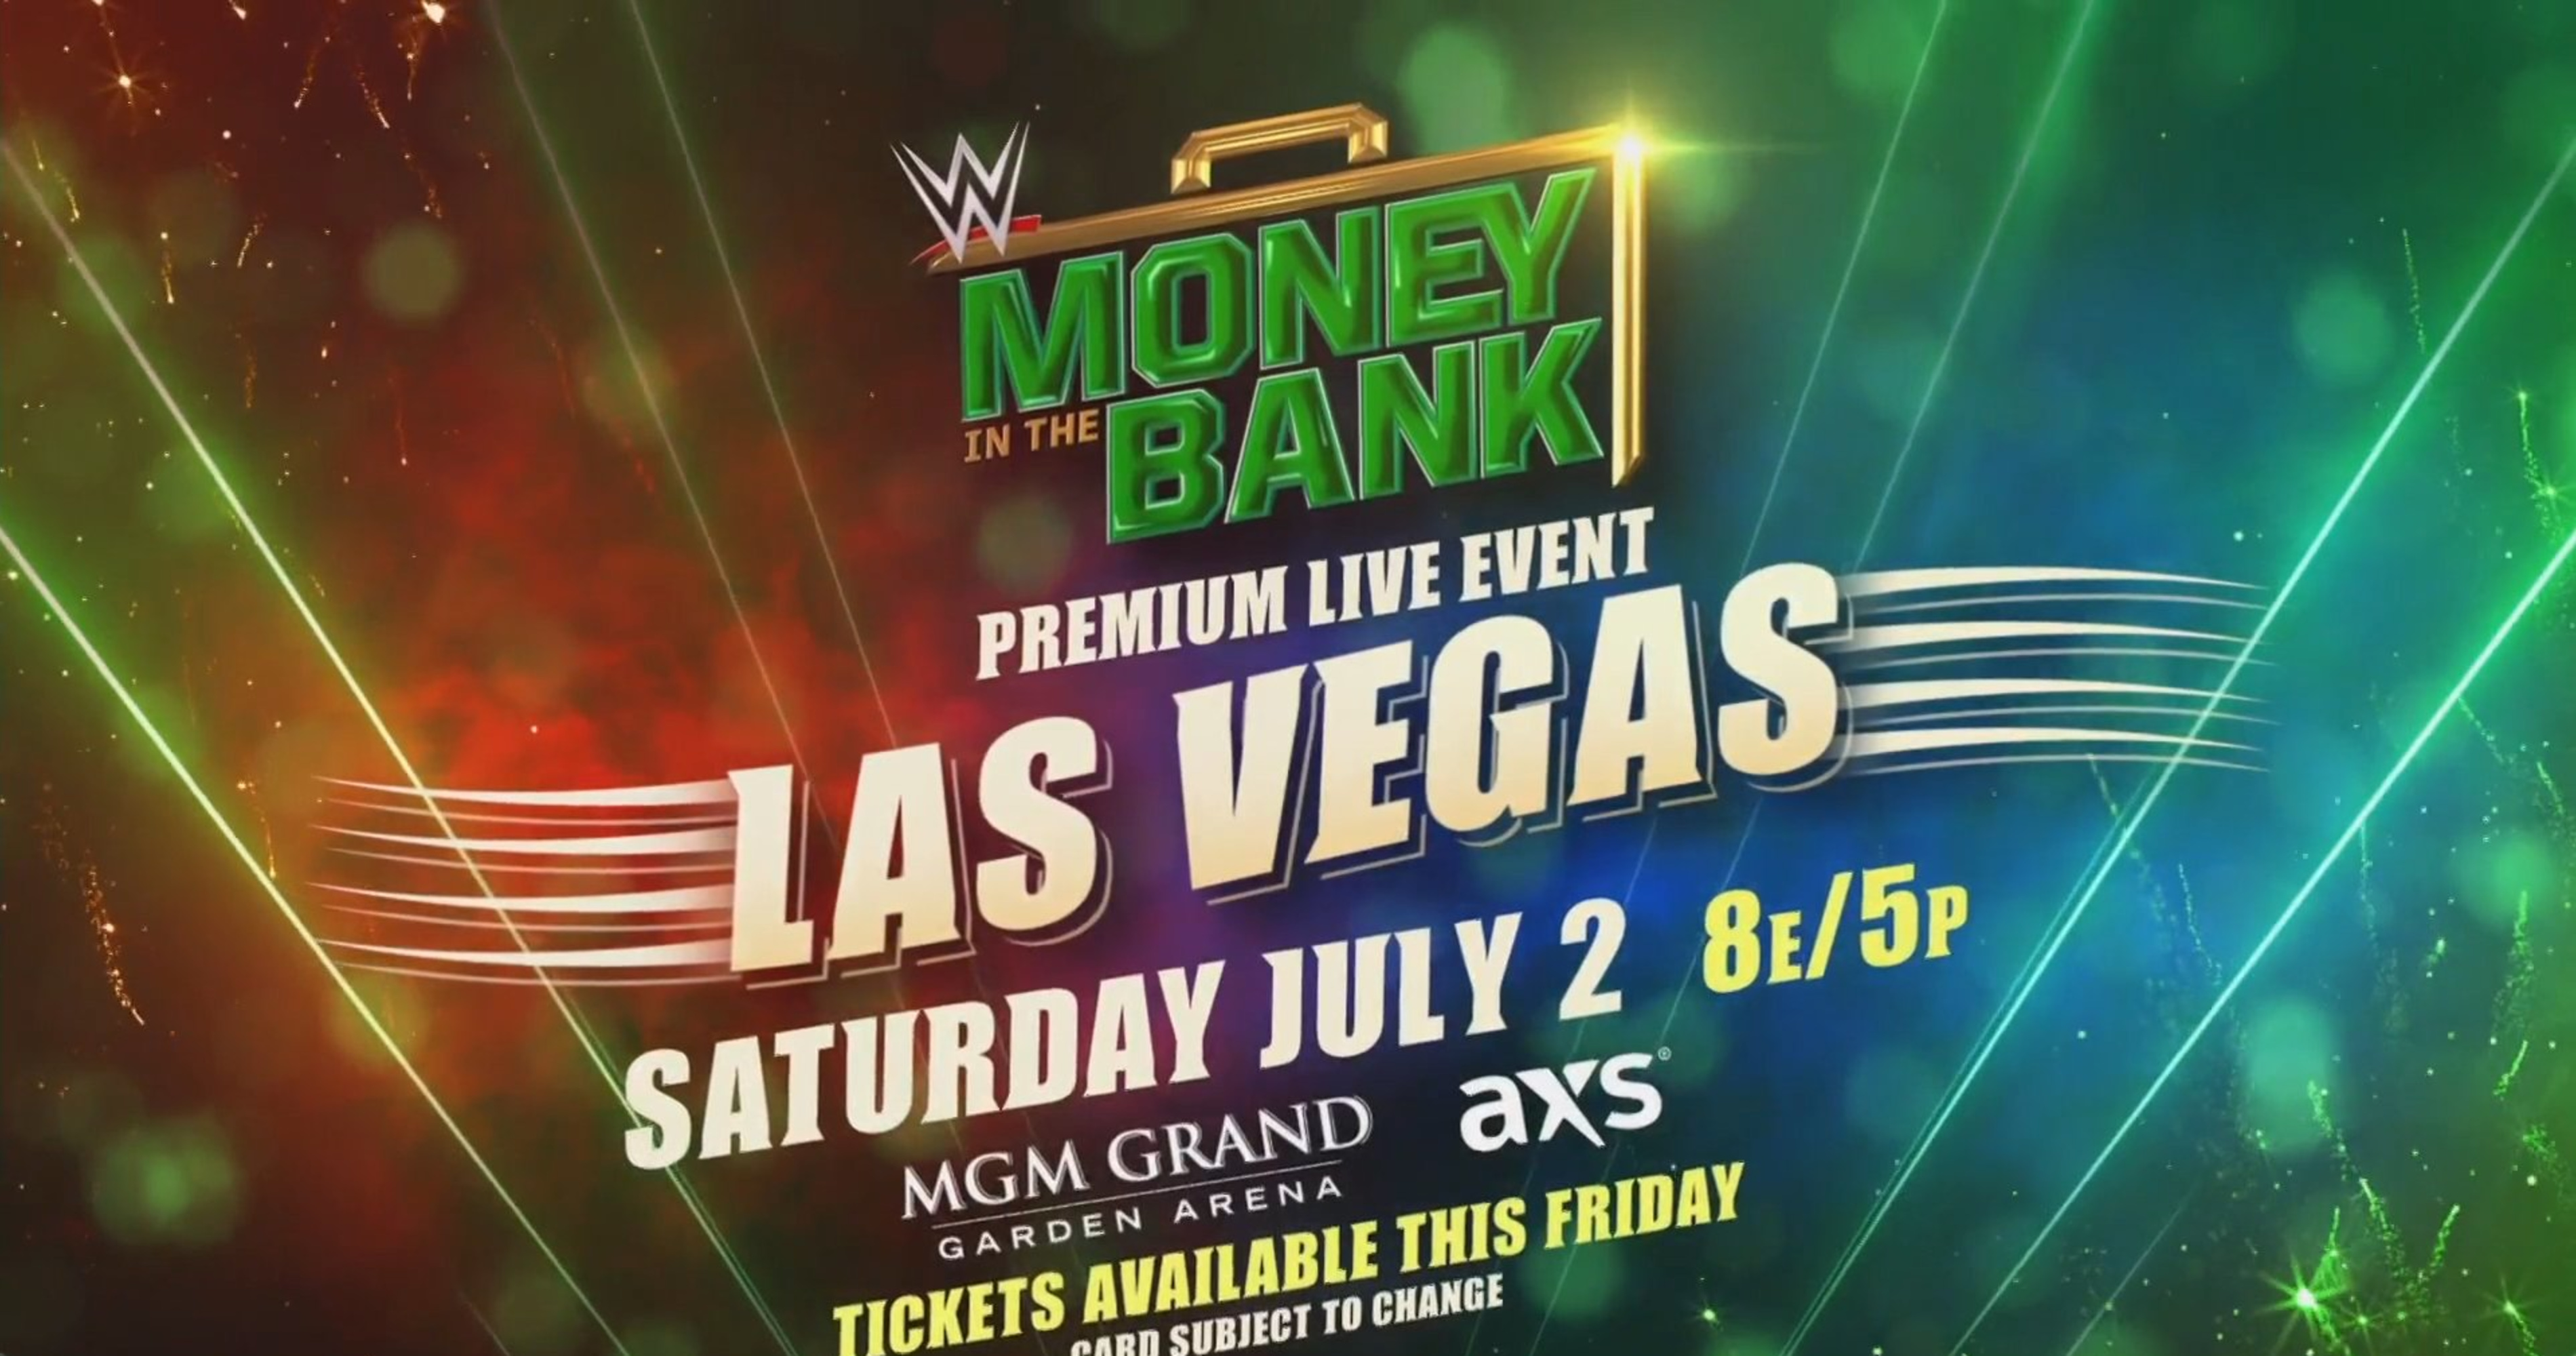 early-predictions-for-wwe-money-in-the-bank-2022-match-card-news-scores-highlights-stats